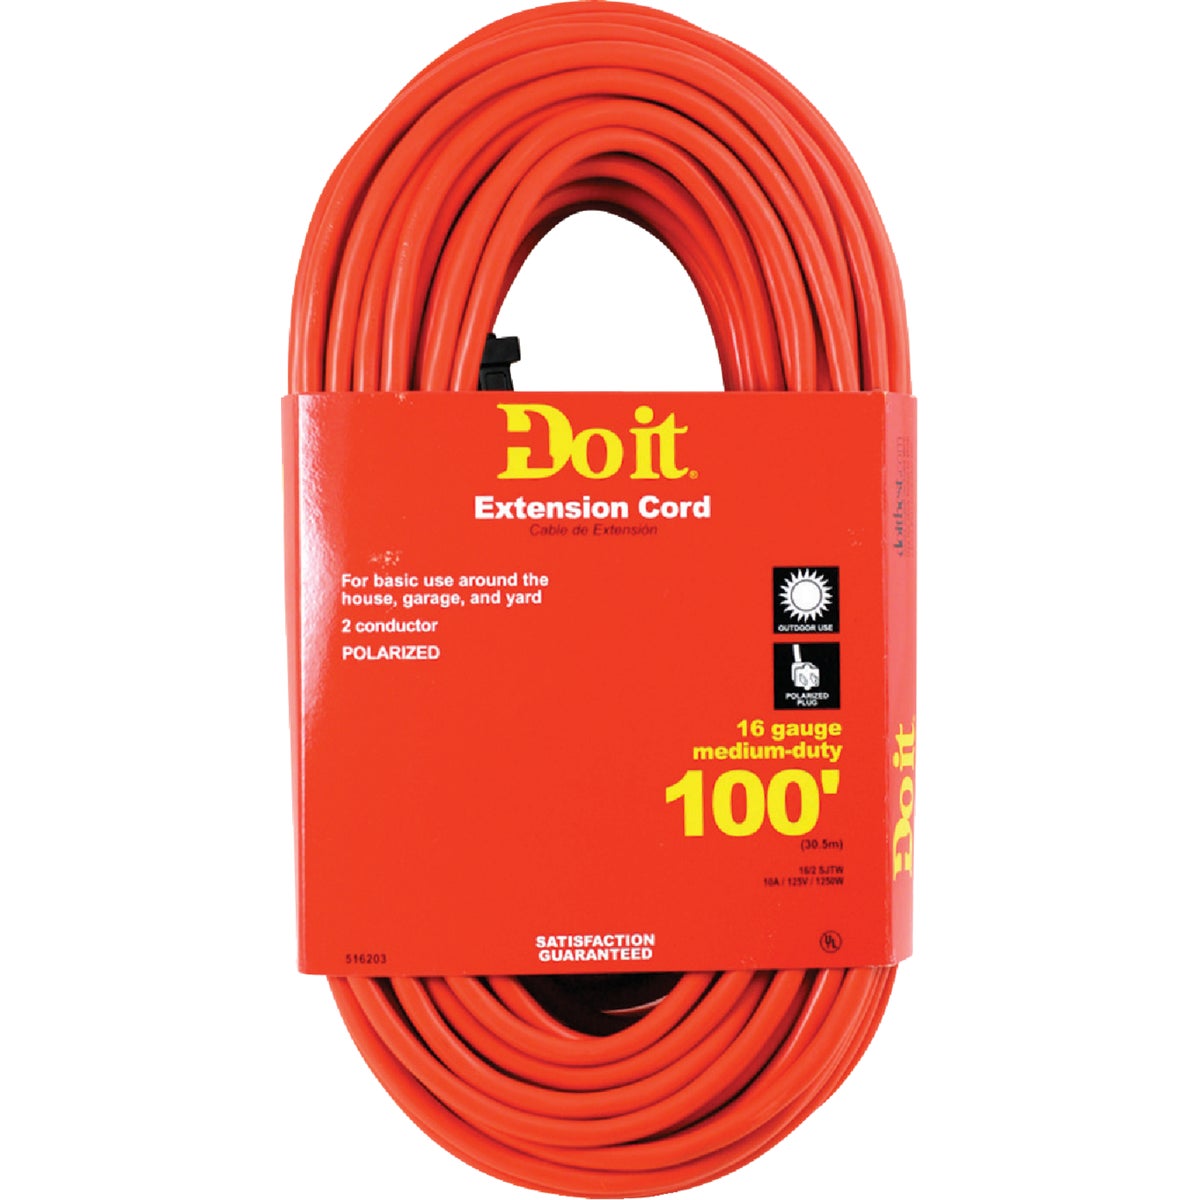 SIM Supply, Inc. OU-JTW162-100-OR Do it 100 Ft. 16/2 Polarized Outdoor Extension Cord OU-JTW162-100-OR